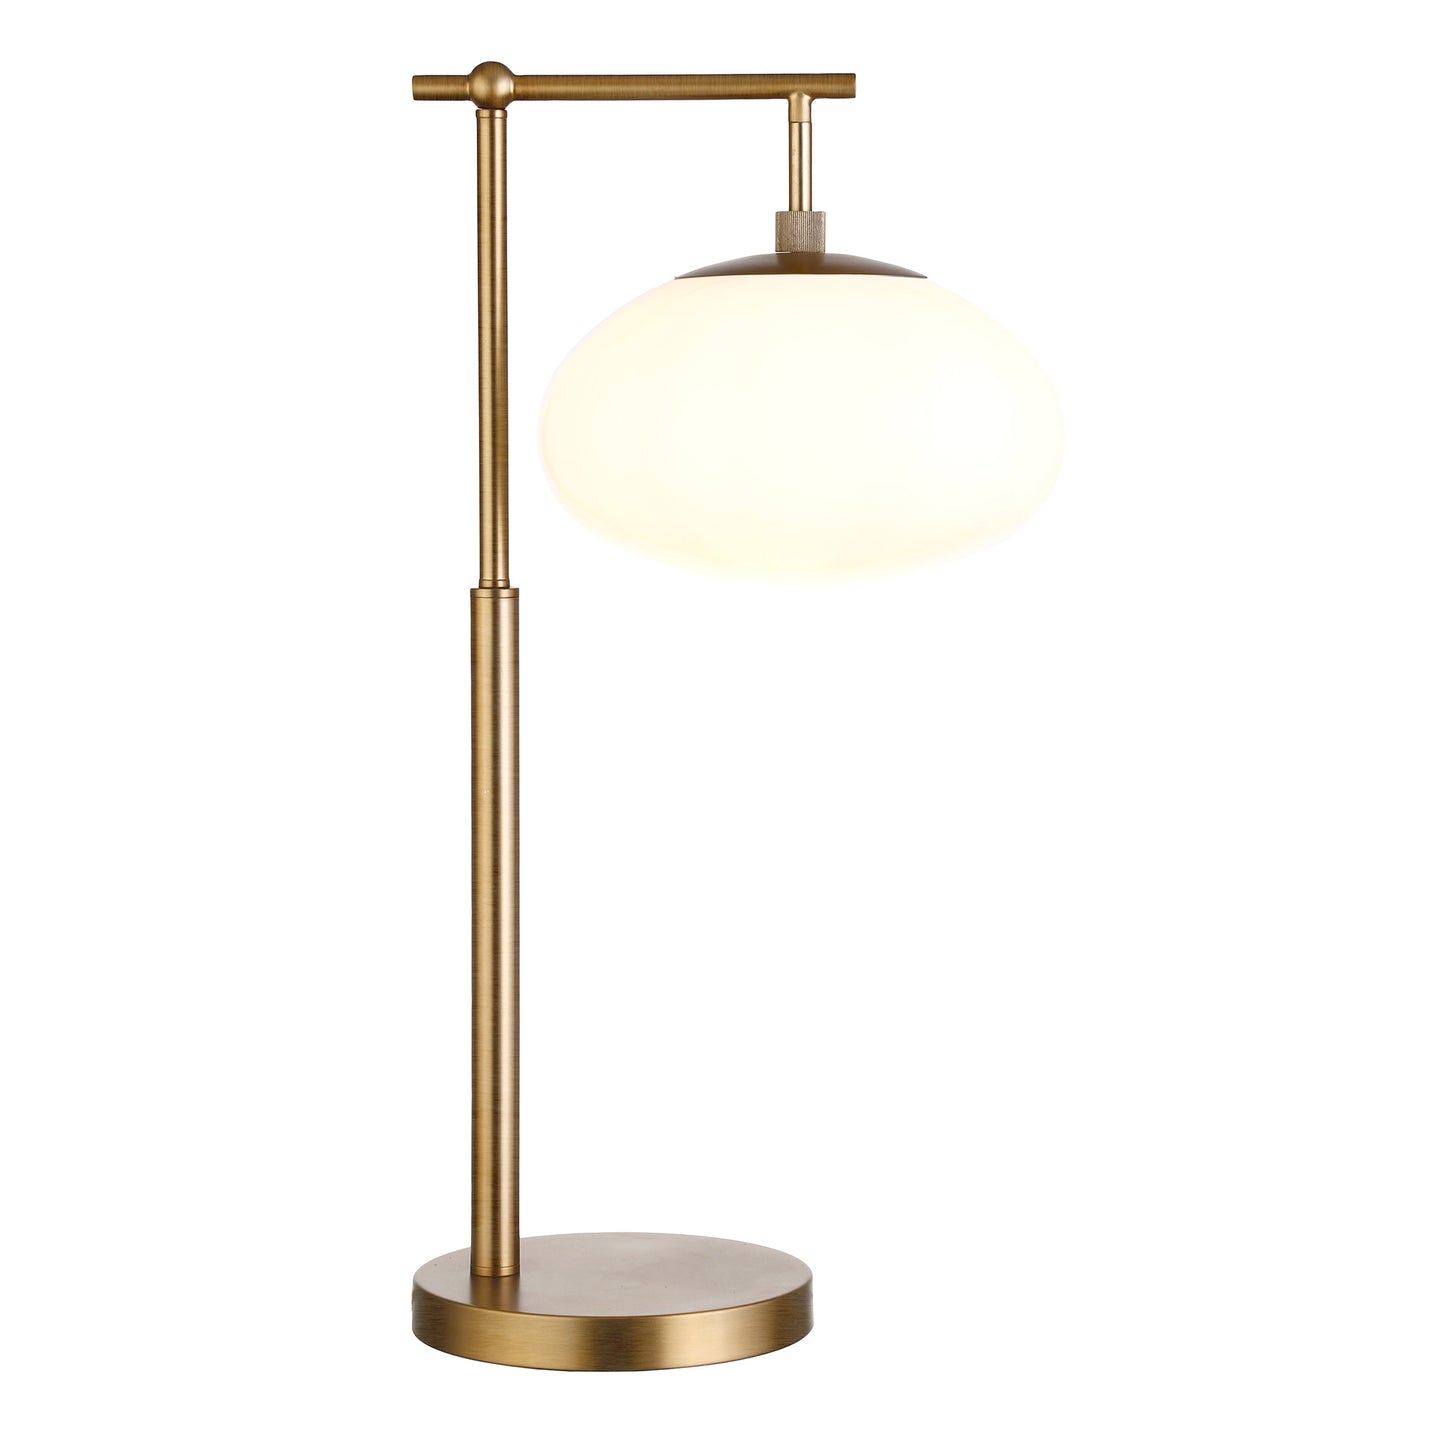 25" Brass Metal Arched Table Lamp With White Globe Shade